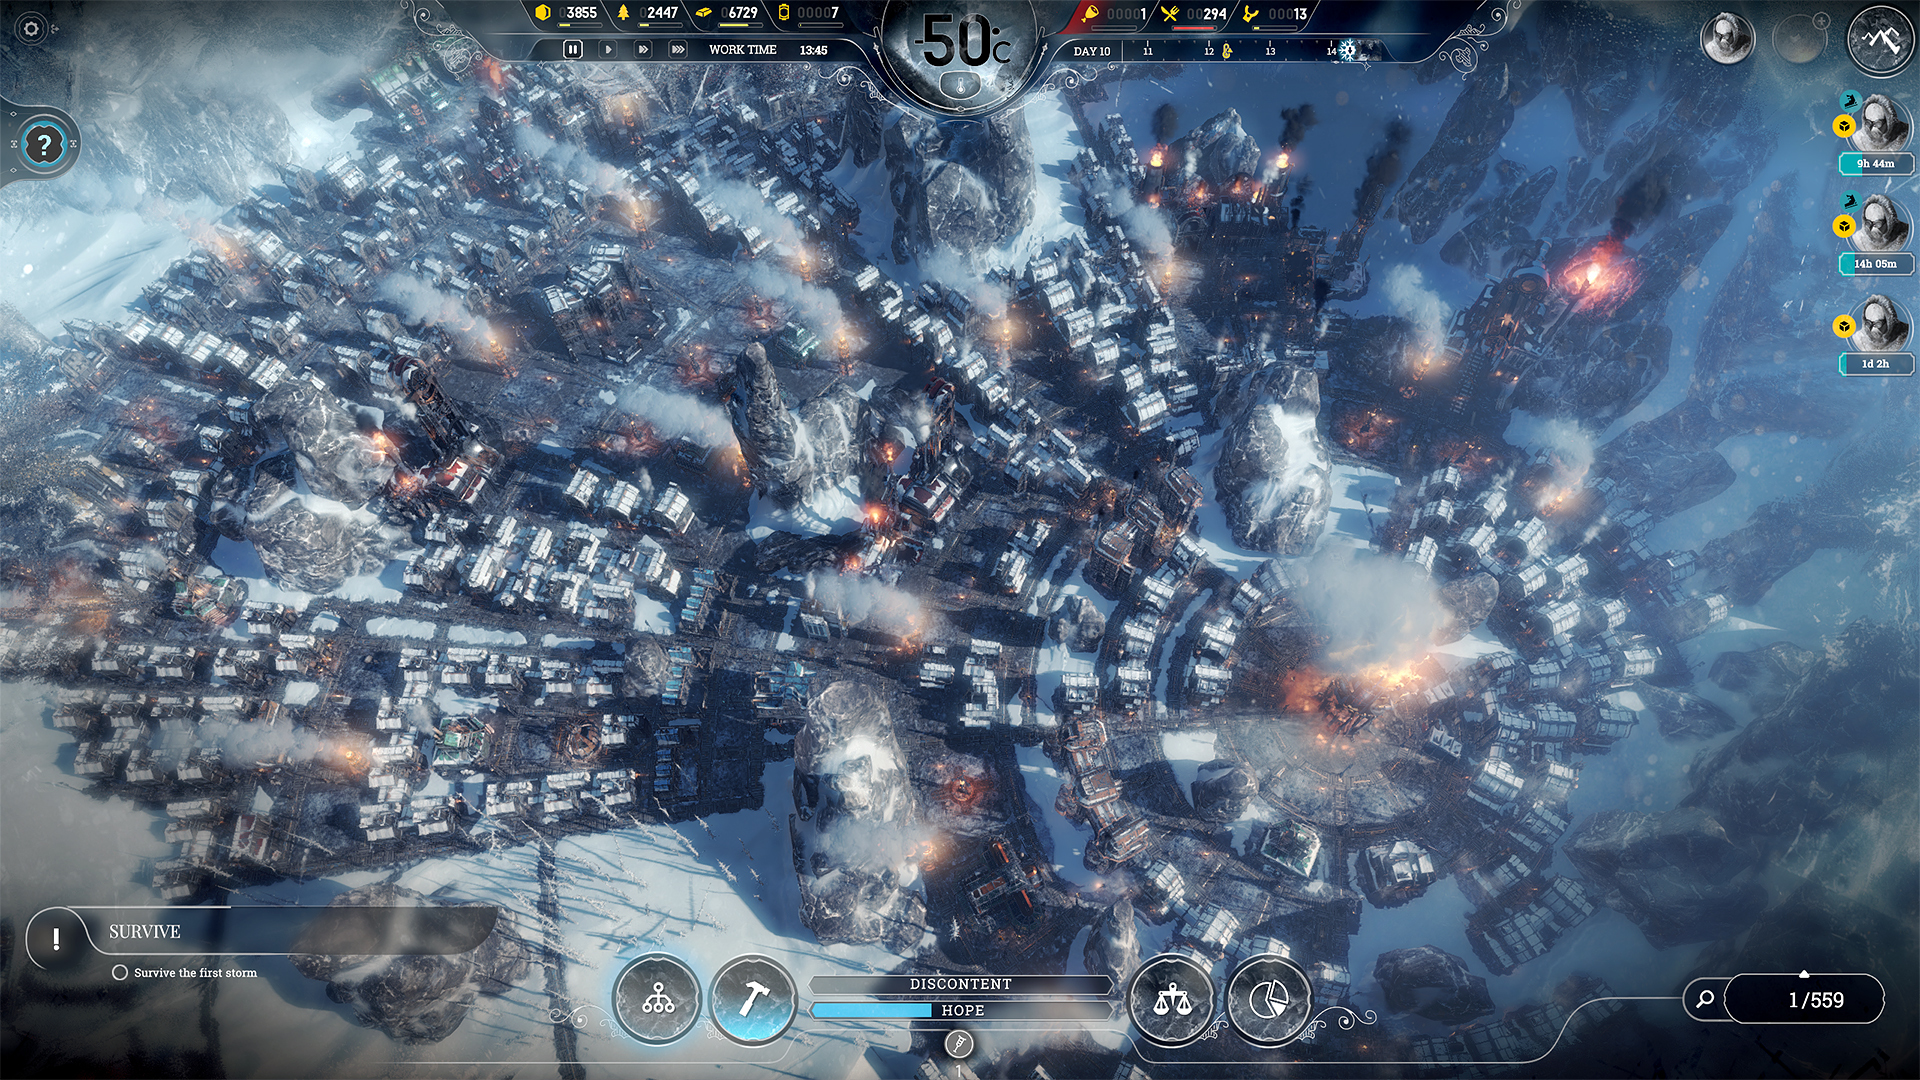 fløjte stille Elegance Nov 19, 2018 The biggest Frostpunk DLC so far: ENDLESS MODE - AVAILABLE NOW  for free! Frostpunk - Rufus Blackwood Hello there, fellow Citizens! We have  some amazing and long-awaited news to share! As planned, and promised in  the ...